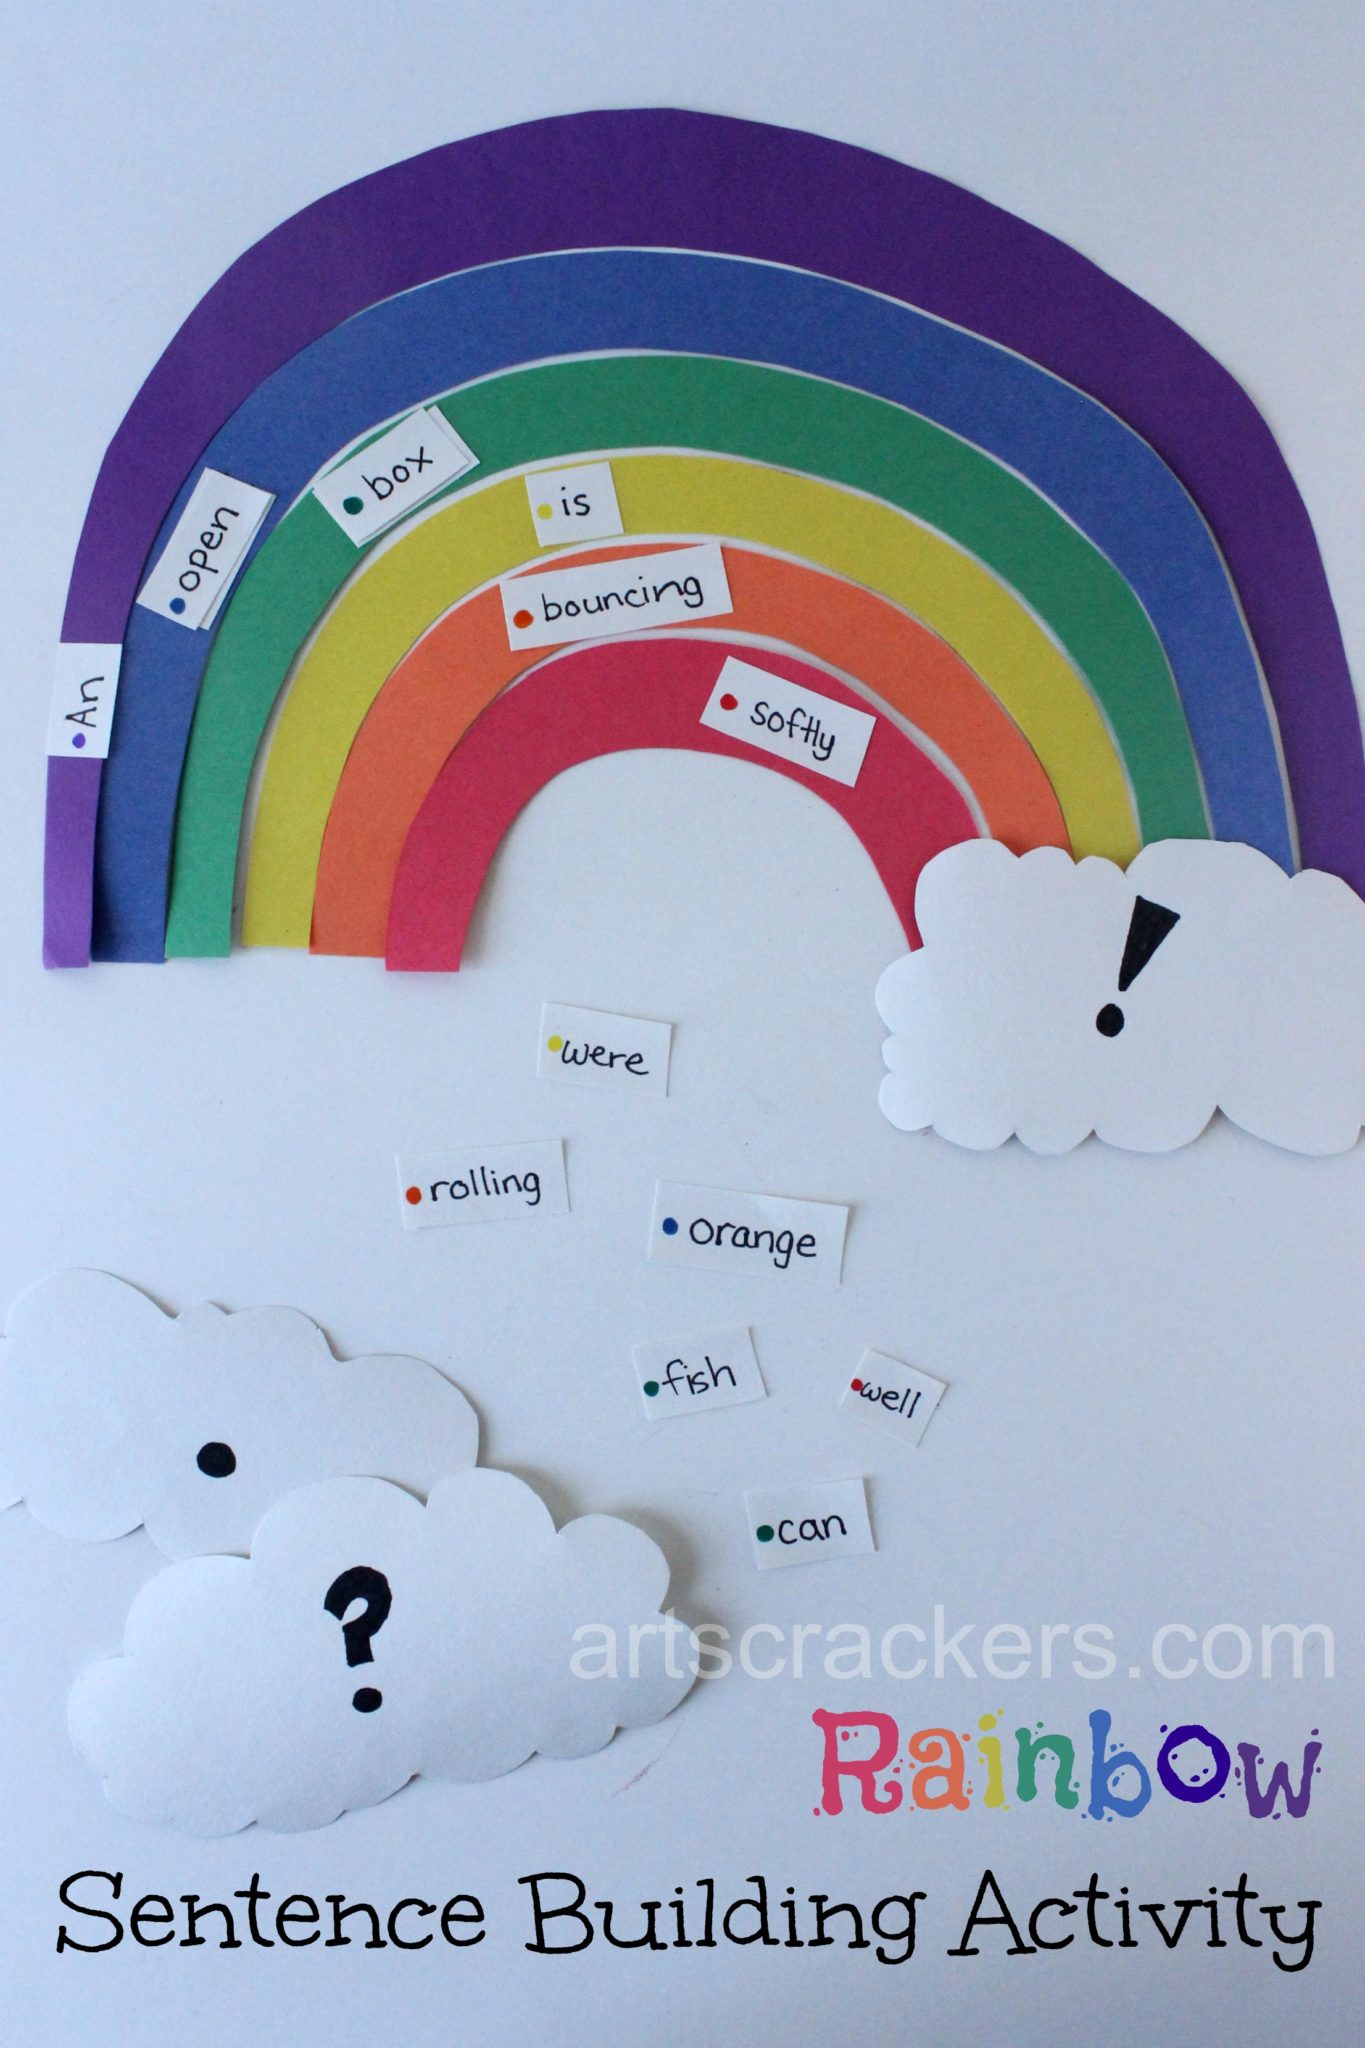 Rainbow Sentence Building Activity For Kids. Click the picture to view the tutorial.